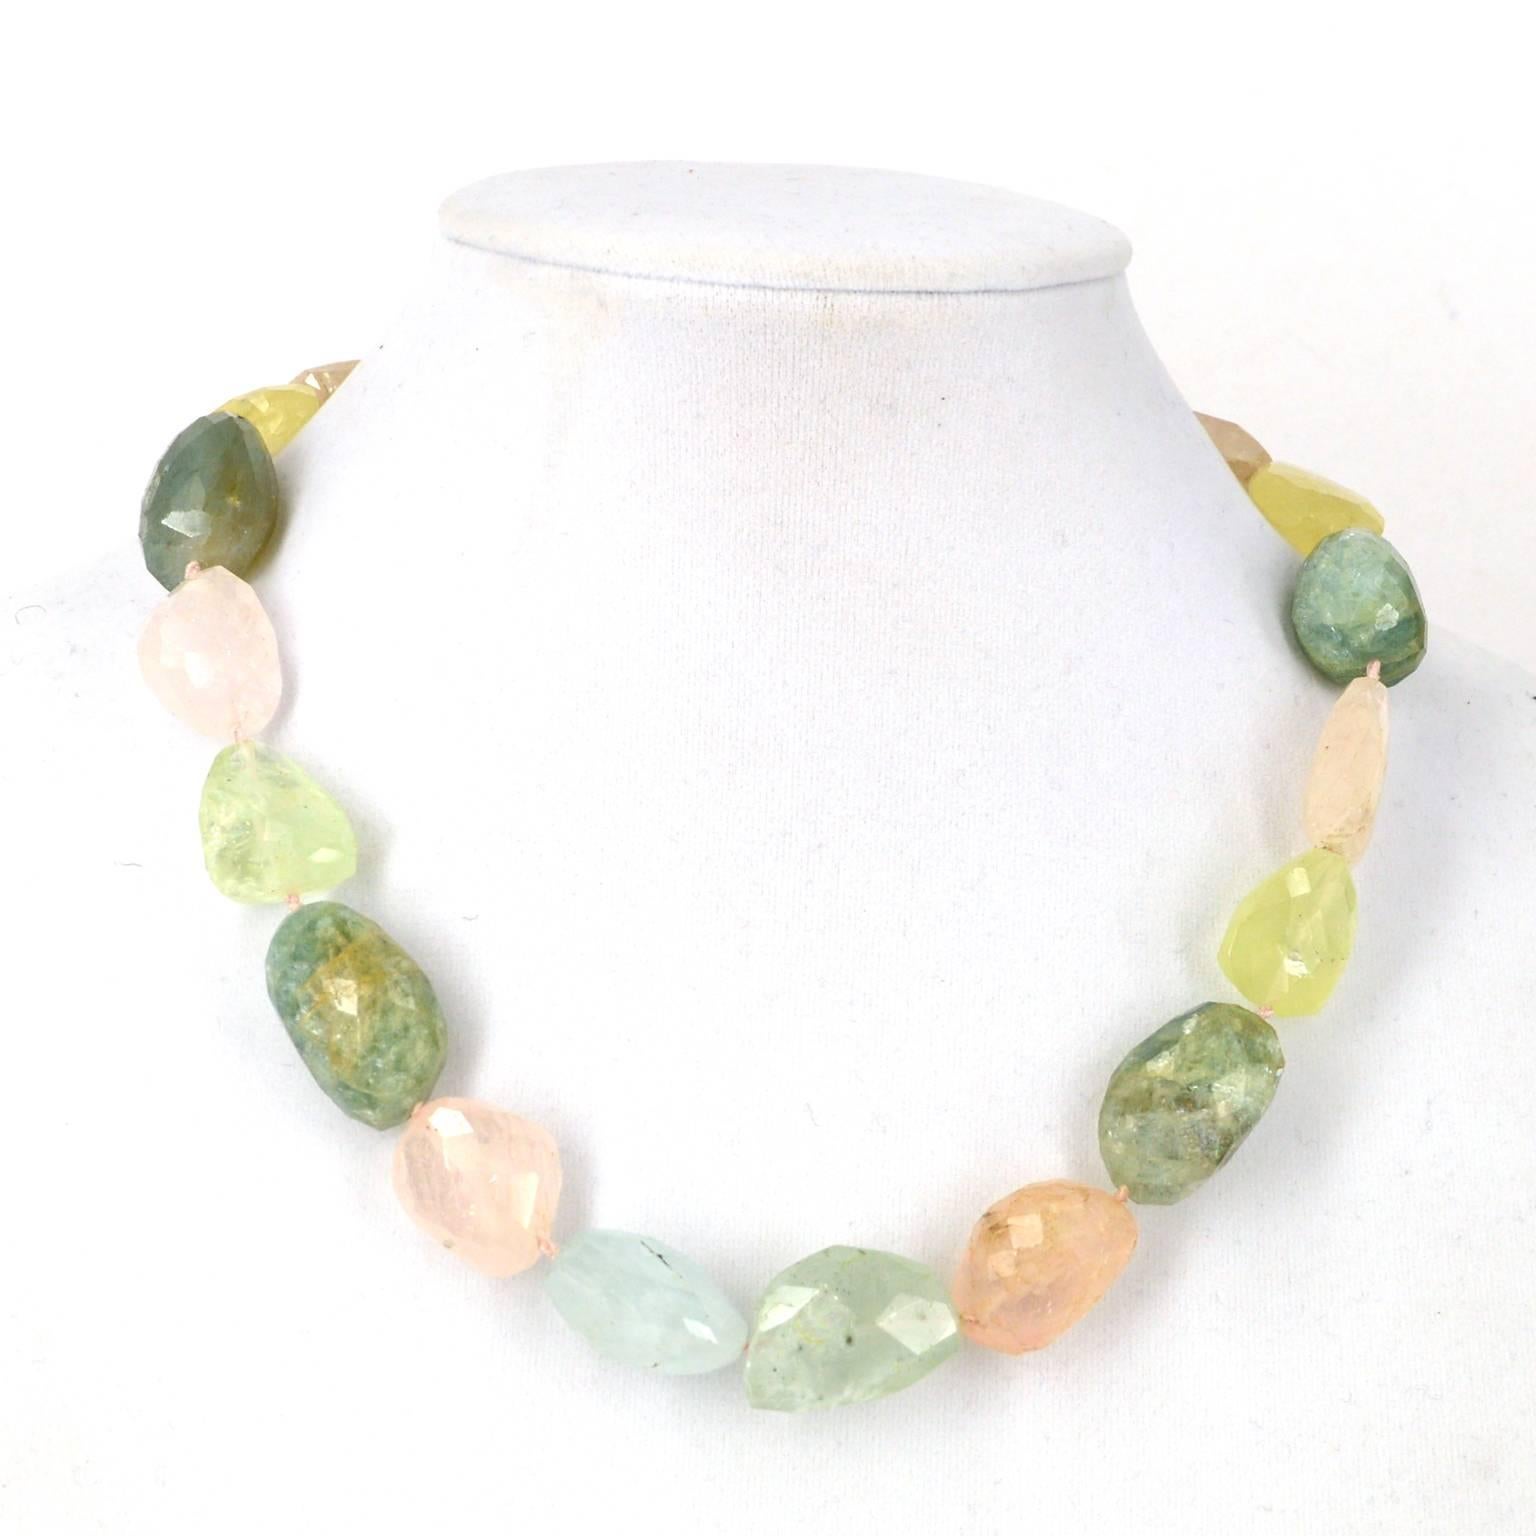 Faceted Beryl nuggets.
25mm beads. Hand knotted on light rose thread.
46cm Necklace
Sterling silver hook clasp
All stones are natural and as such may include natural inclusions.
